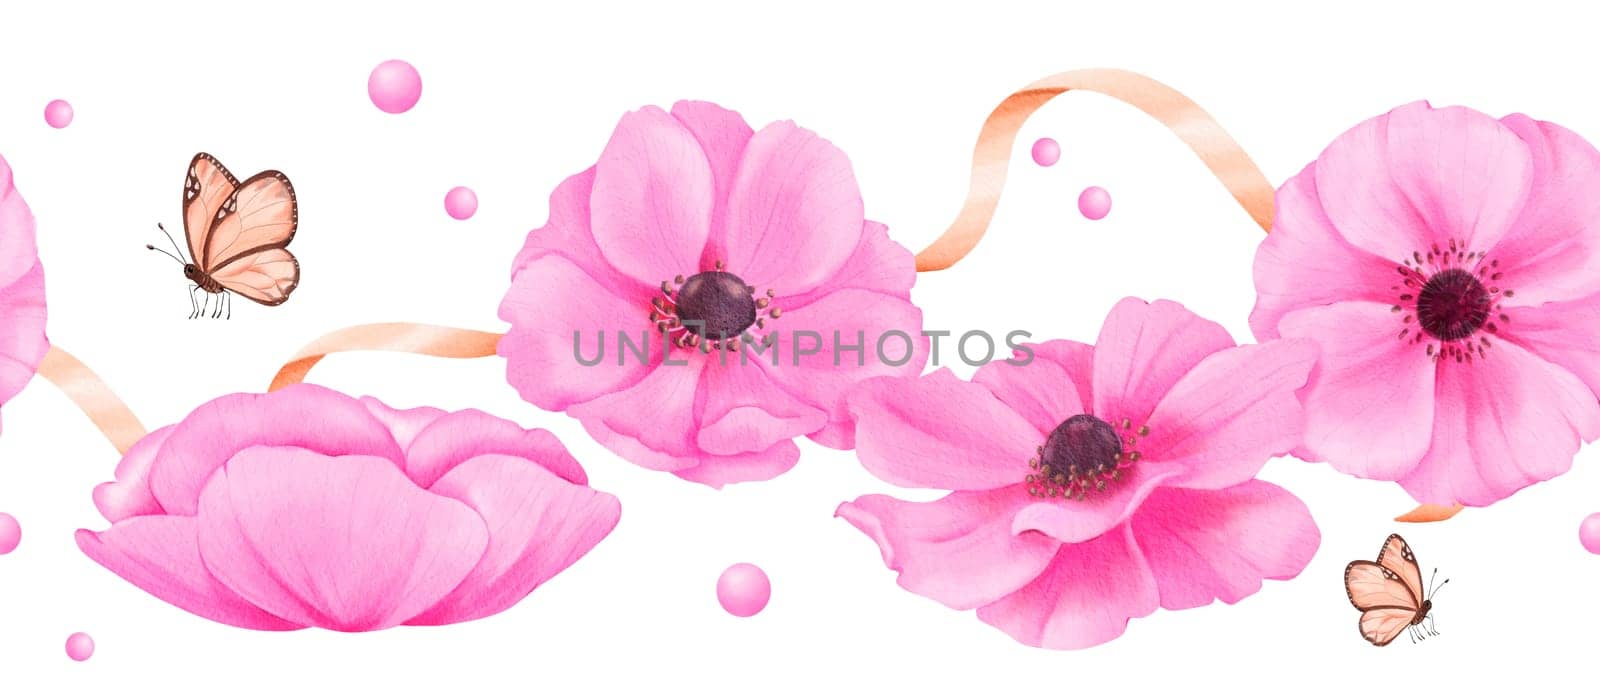 A seamless border featuring delicate pink anemones, adorned with ribbons, rhinestones, and butterflies. watercolor illustration for scrapbooking digital backgrounds website banners or social media.